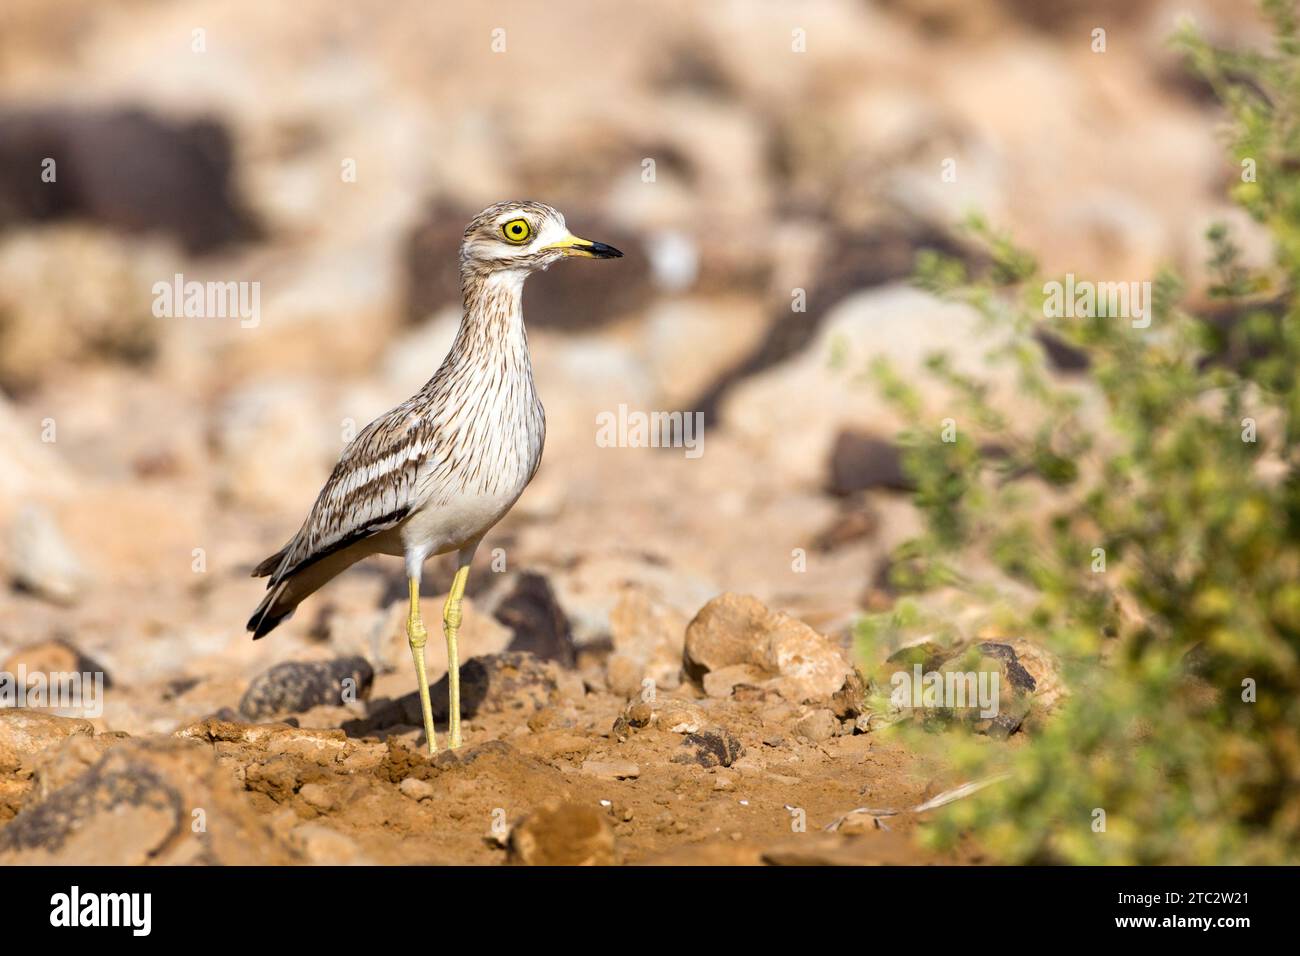 Stone curlew (Burhinus oedicnemus) on the ground. This wading bird is found in dry open scrublands of Europe, north Africa and south-western Asia. It Stock Photo